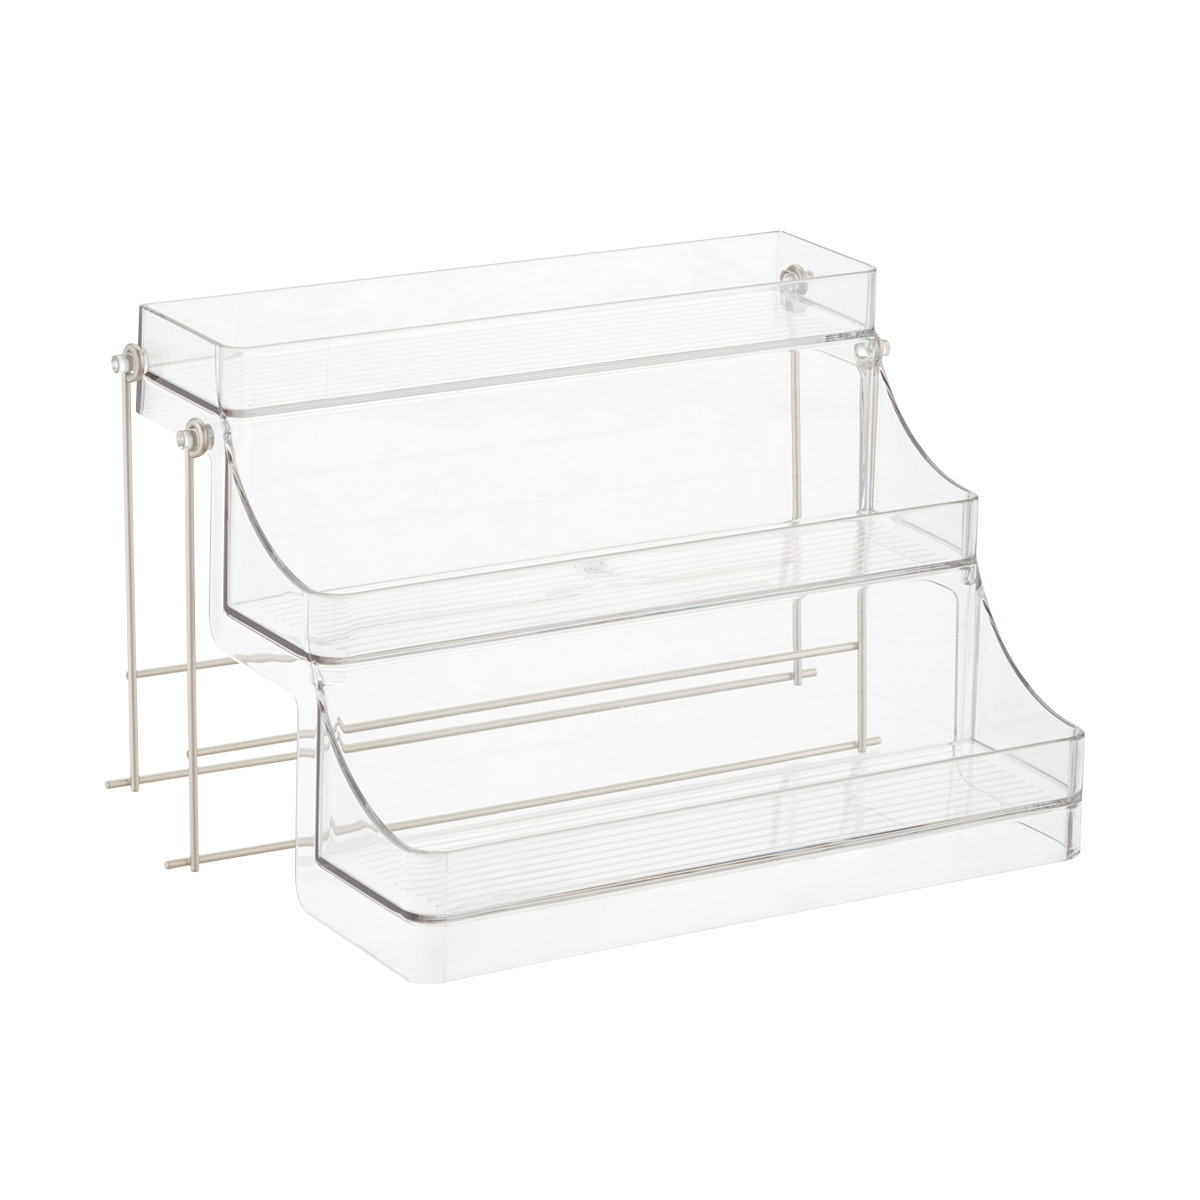 https://www.containerstore.com/catalogimages/335828/10073696-linus-easy-reach-spice-rack.jpg